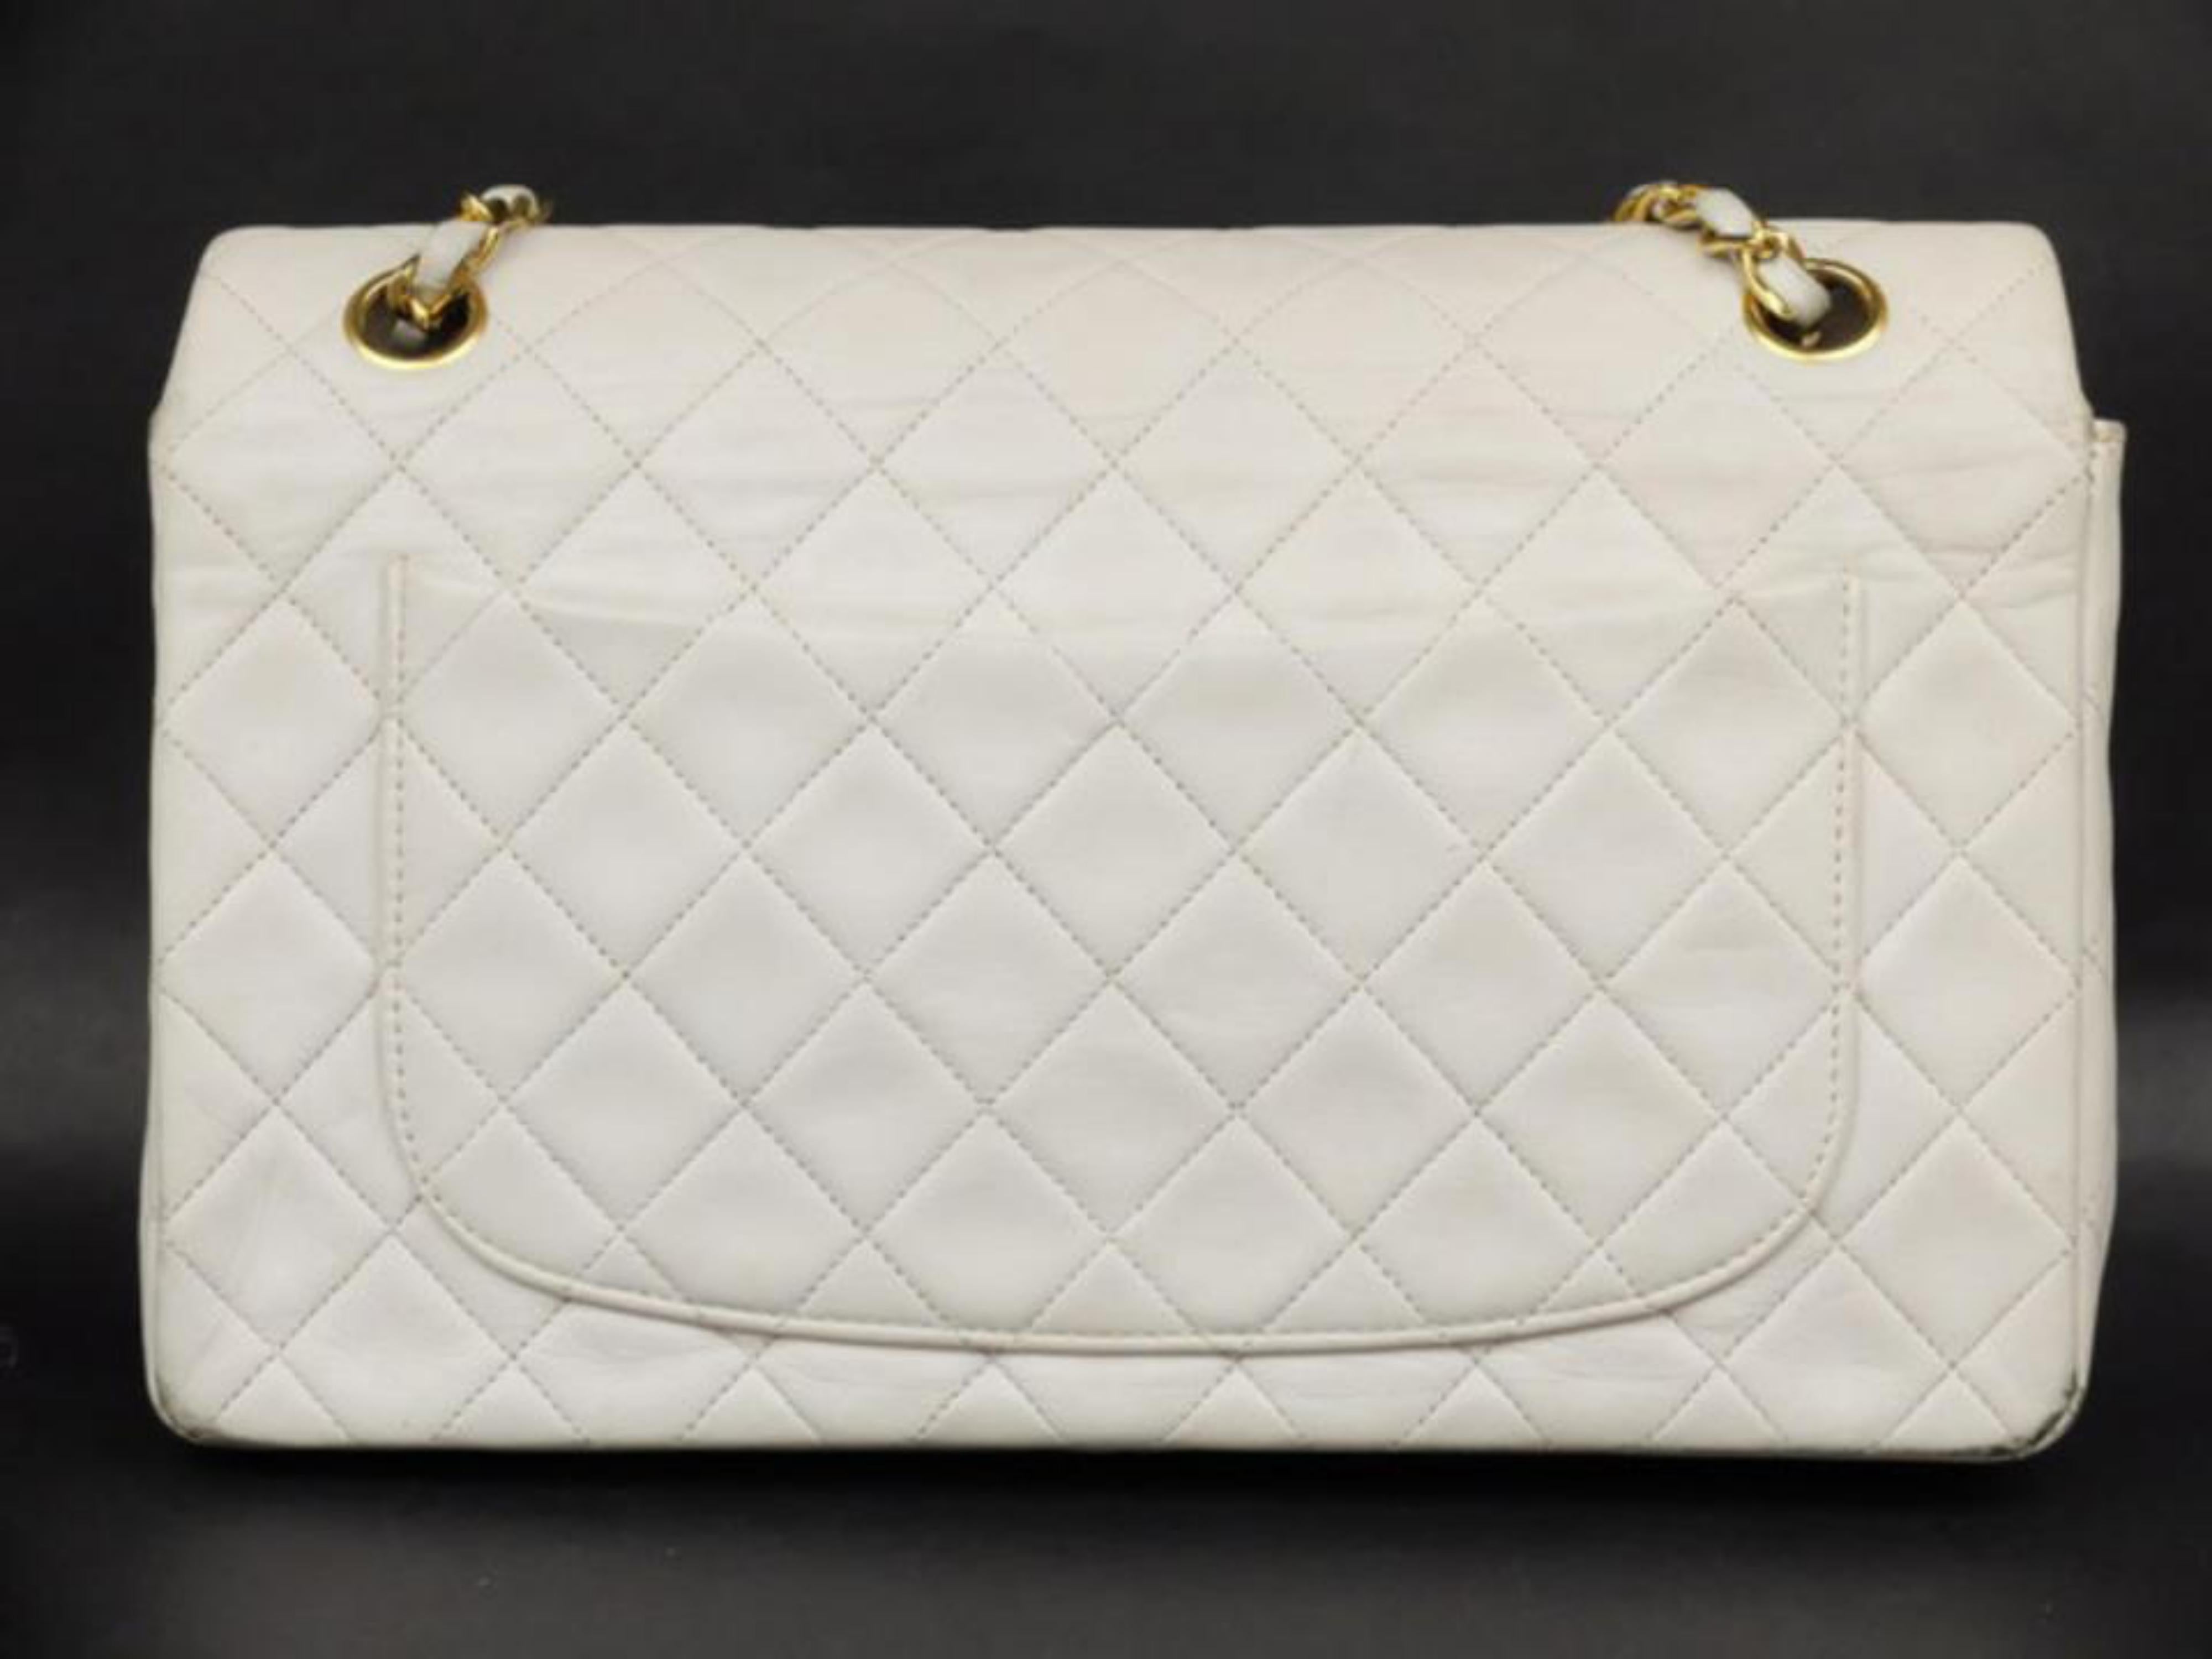 Chanel Classic Flap Quilted Medium 228478 White Leather Shoulder Bag For Sale 3